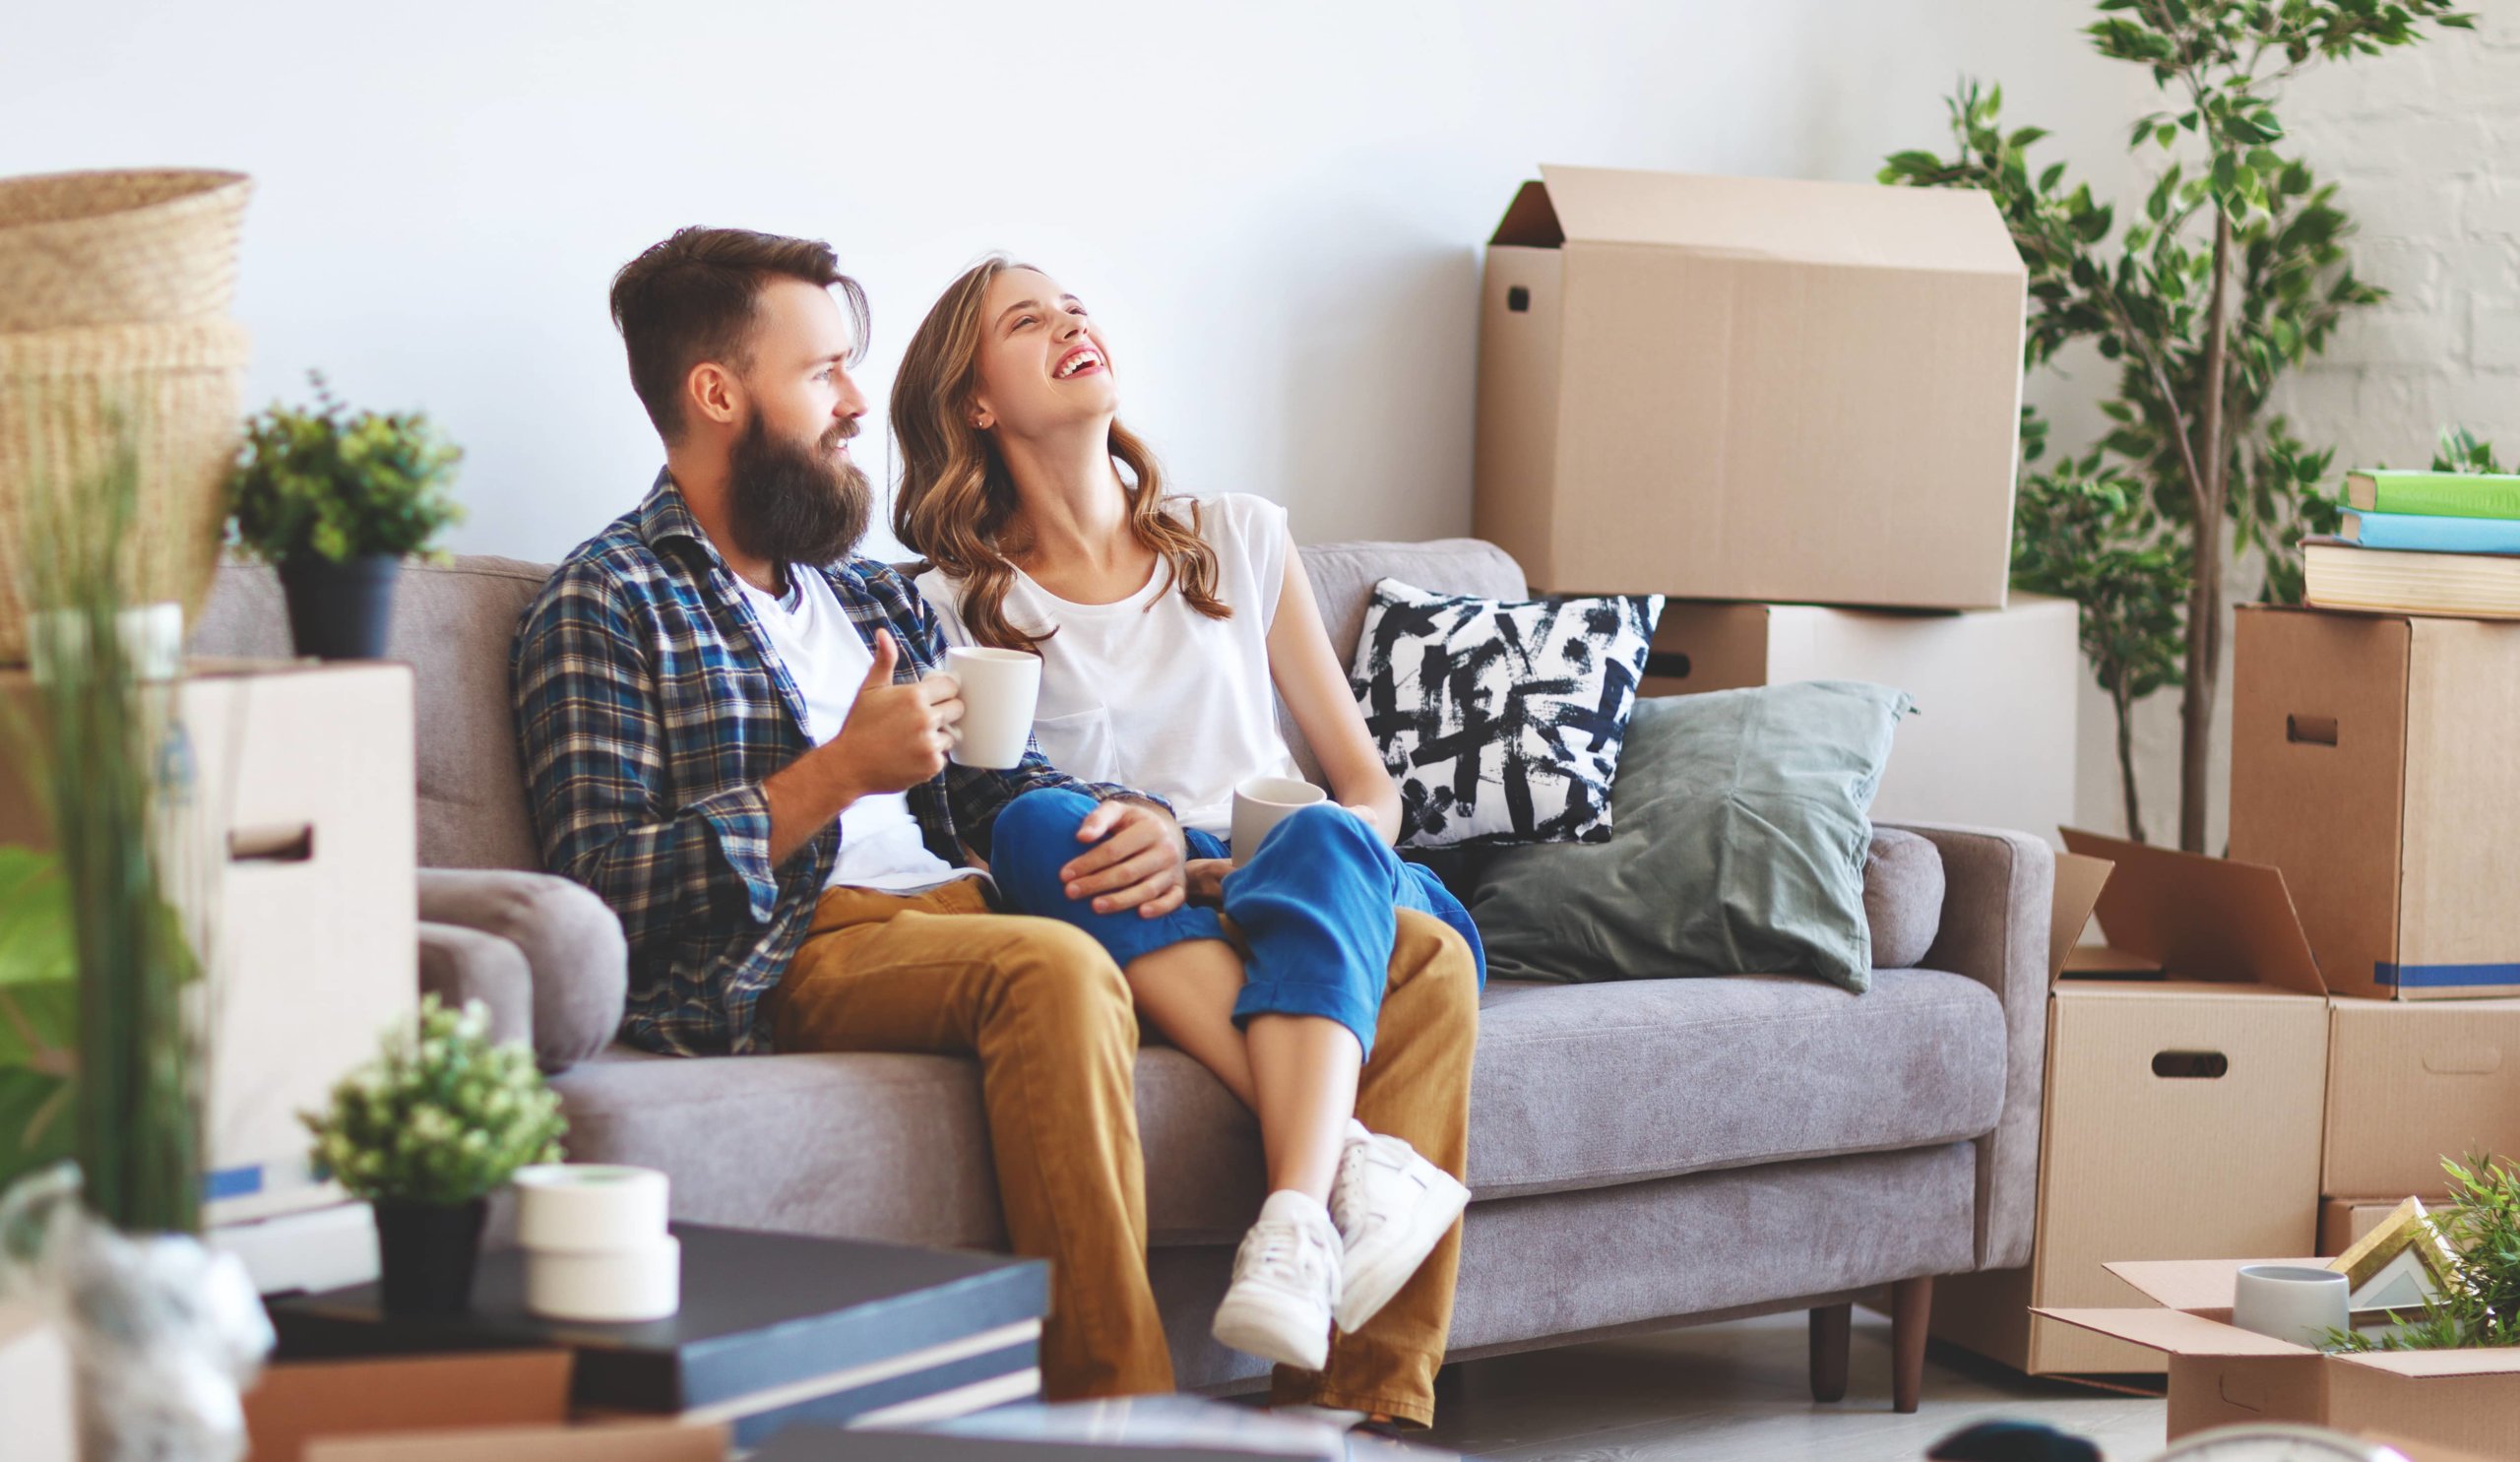 Your couple sitting on the couch in their new home surrounded by boxes that need to be unpacked.